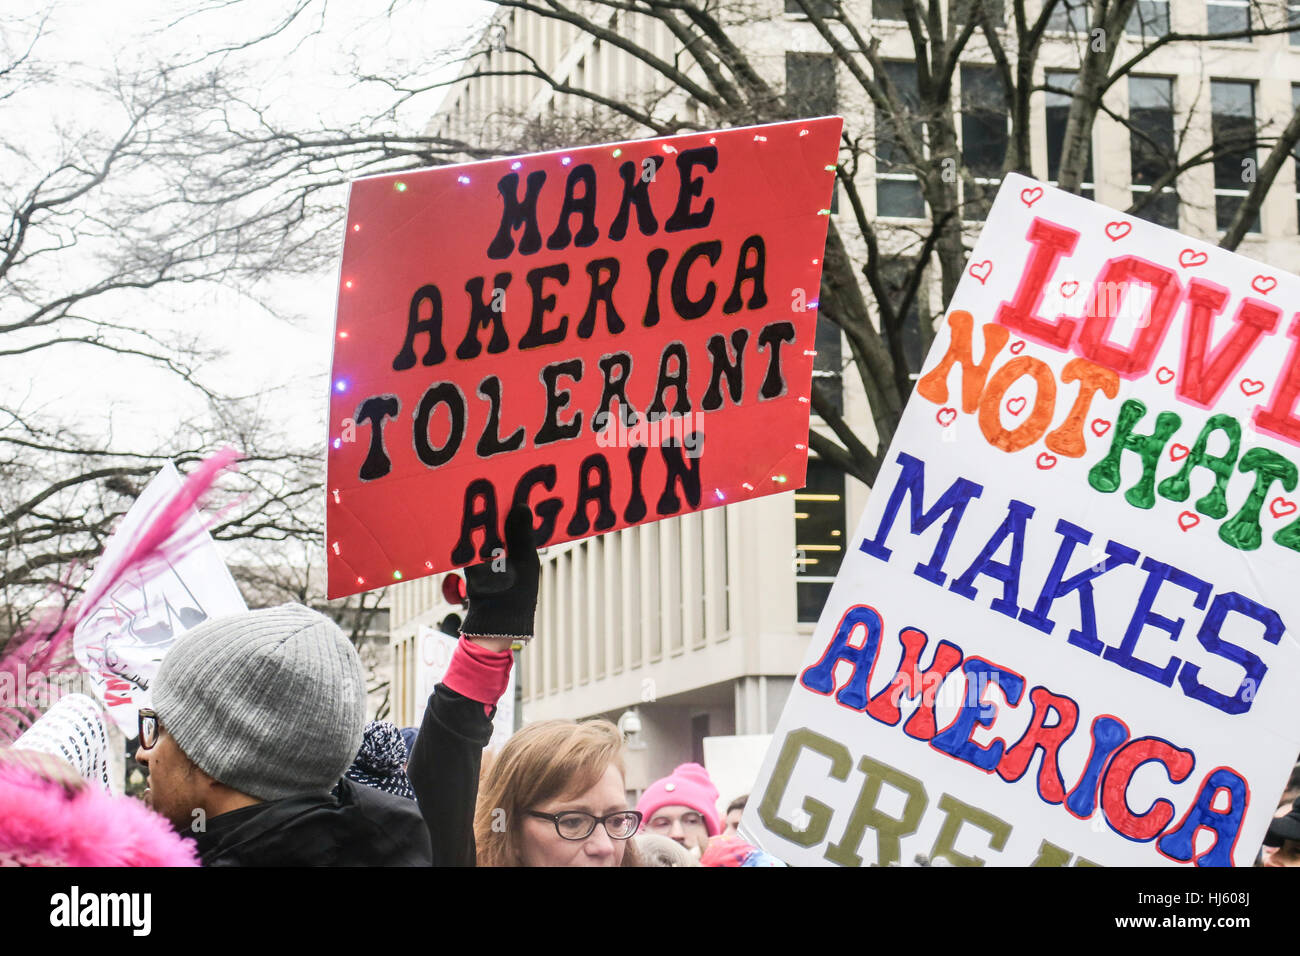 Washington DC, USA. 21st January, 2017. protest signs and protesters duting the largest single day demonstration in US history against the newly elected President, Donald Trump Credit: Clare Coe/Alamy Live News Stock Photo